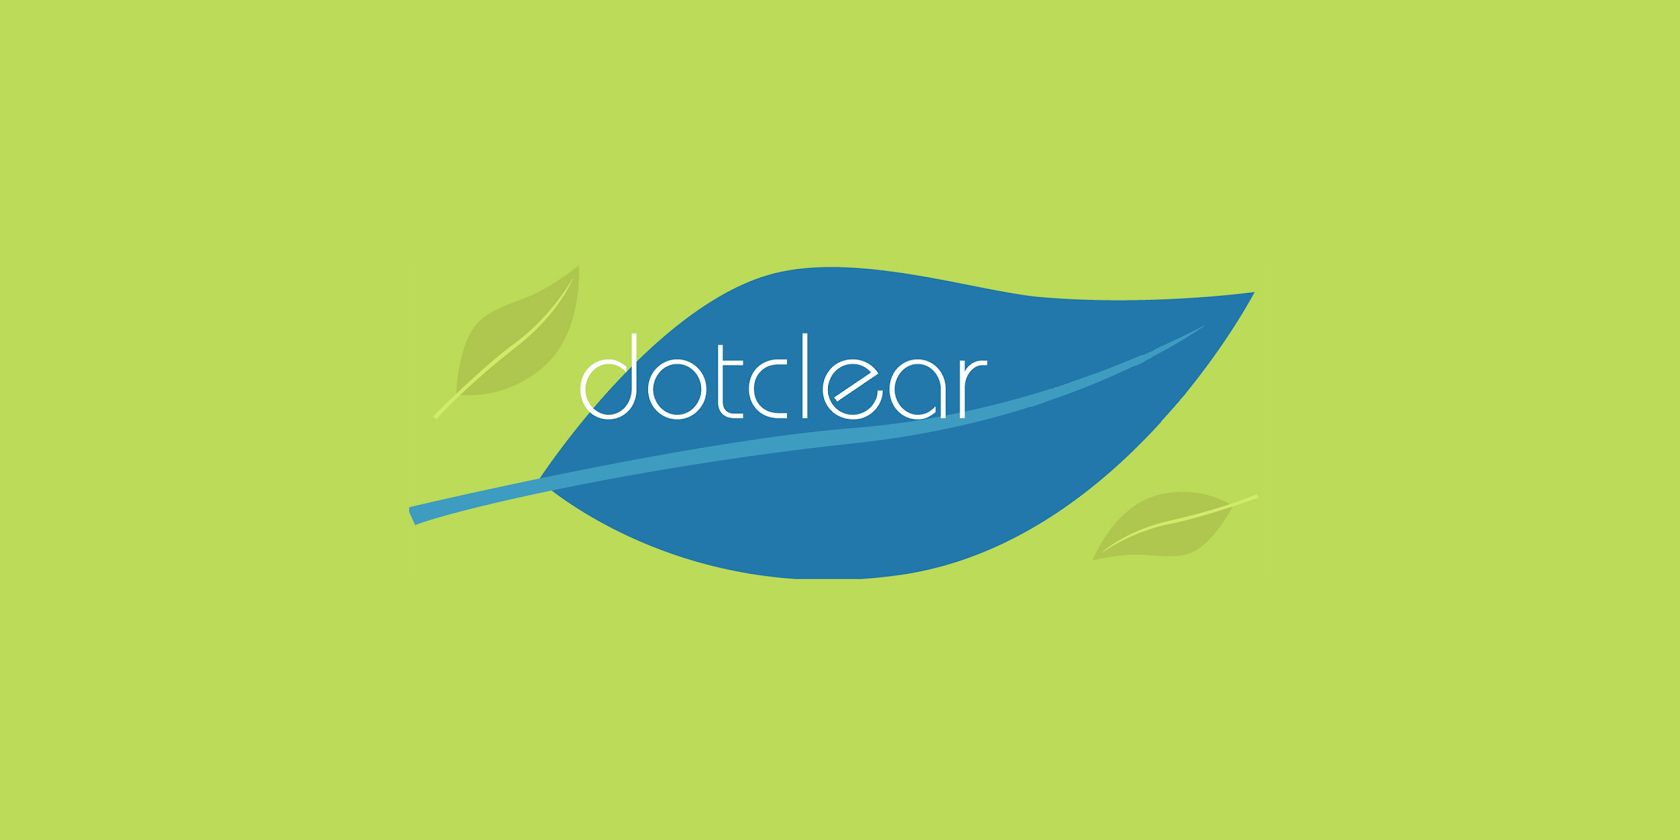 dotclear logo on a green background